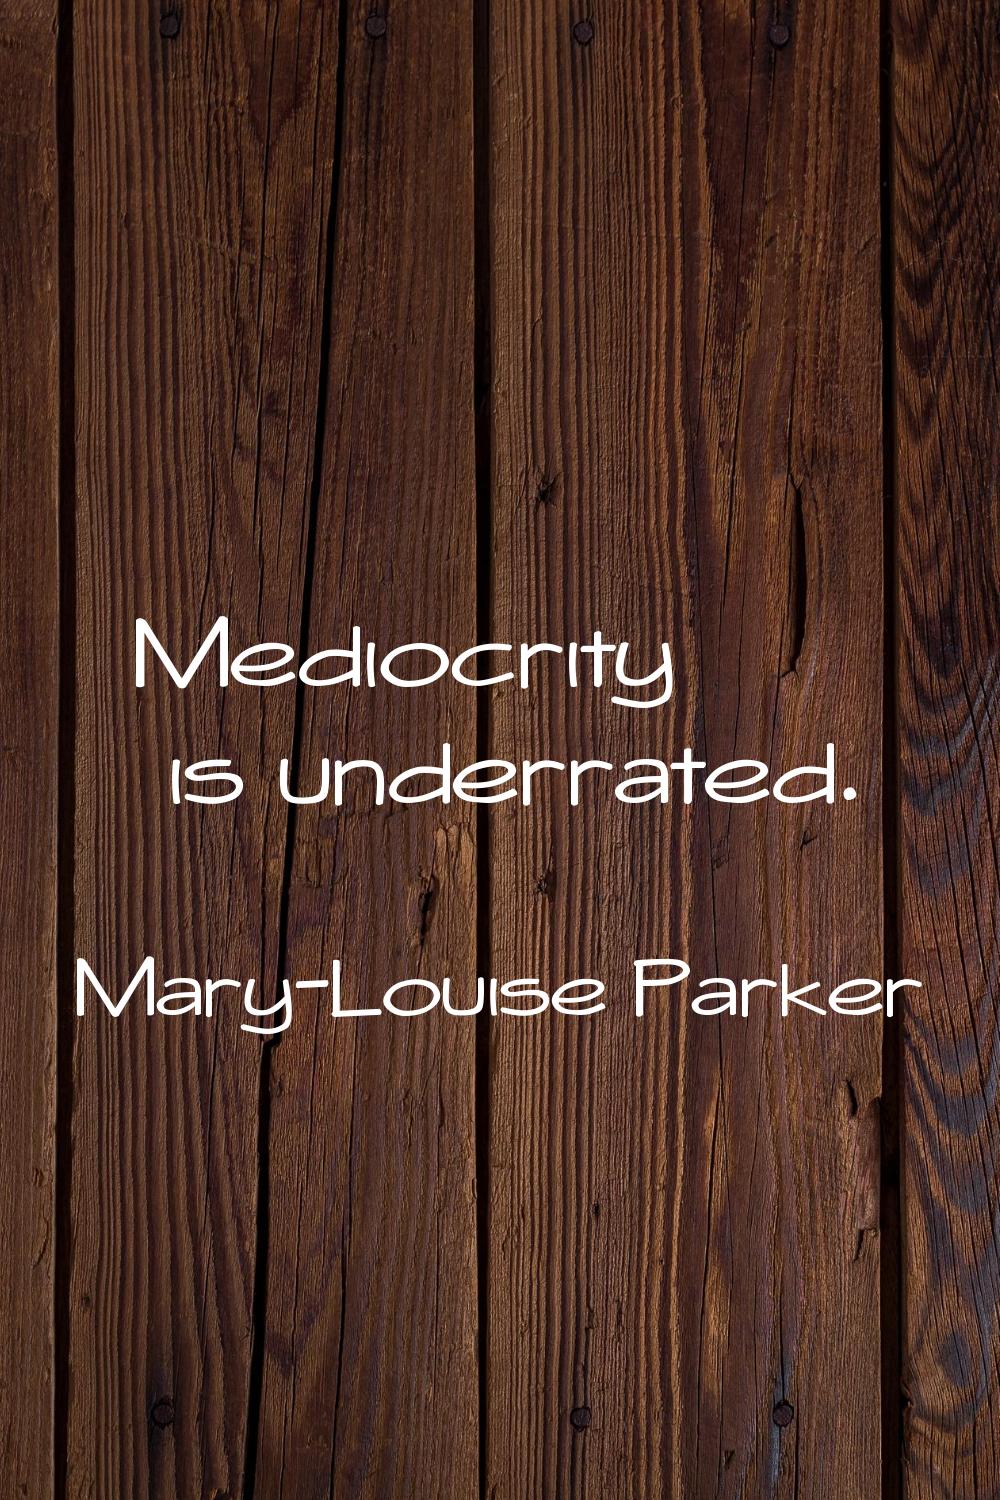 Mediocrity is underrated.